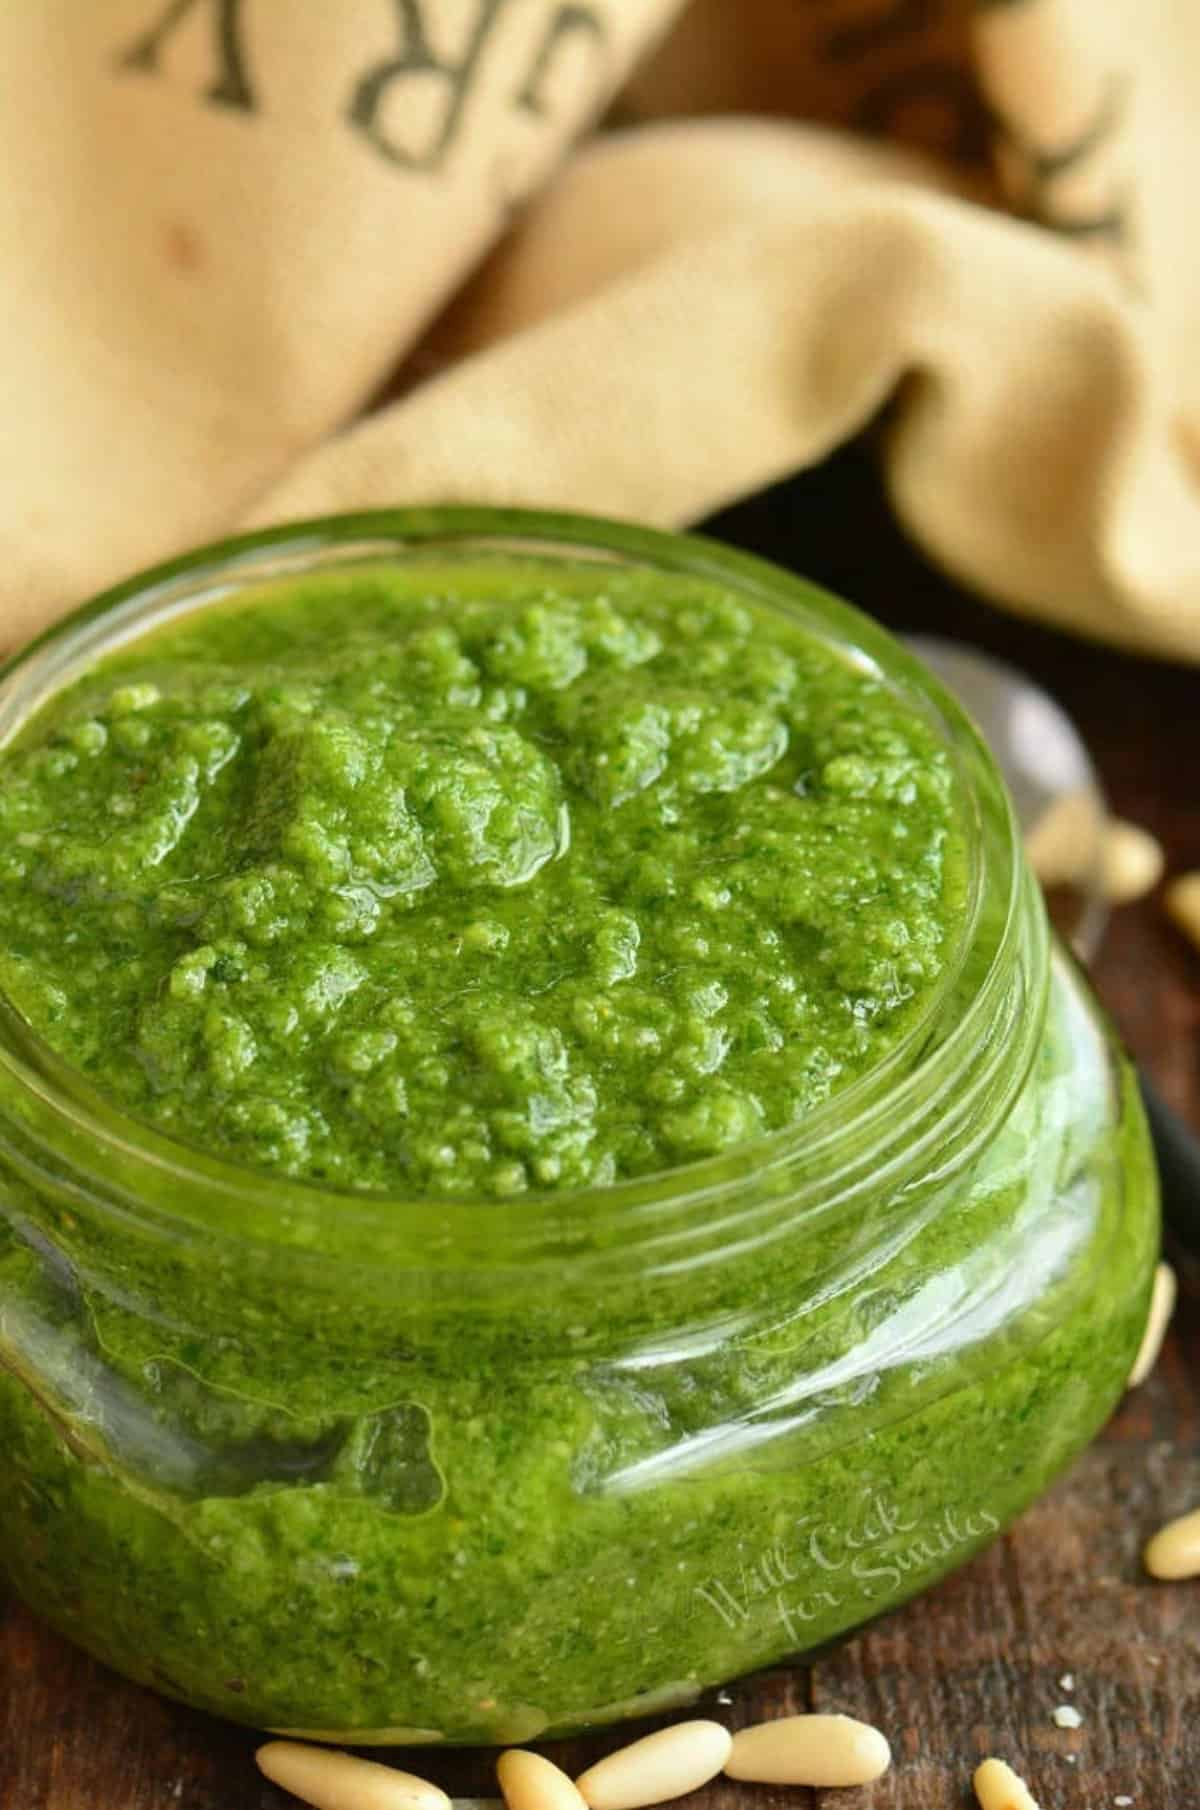 pesto filled to the top of a glass jar with some pine nuts on the table.